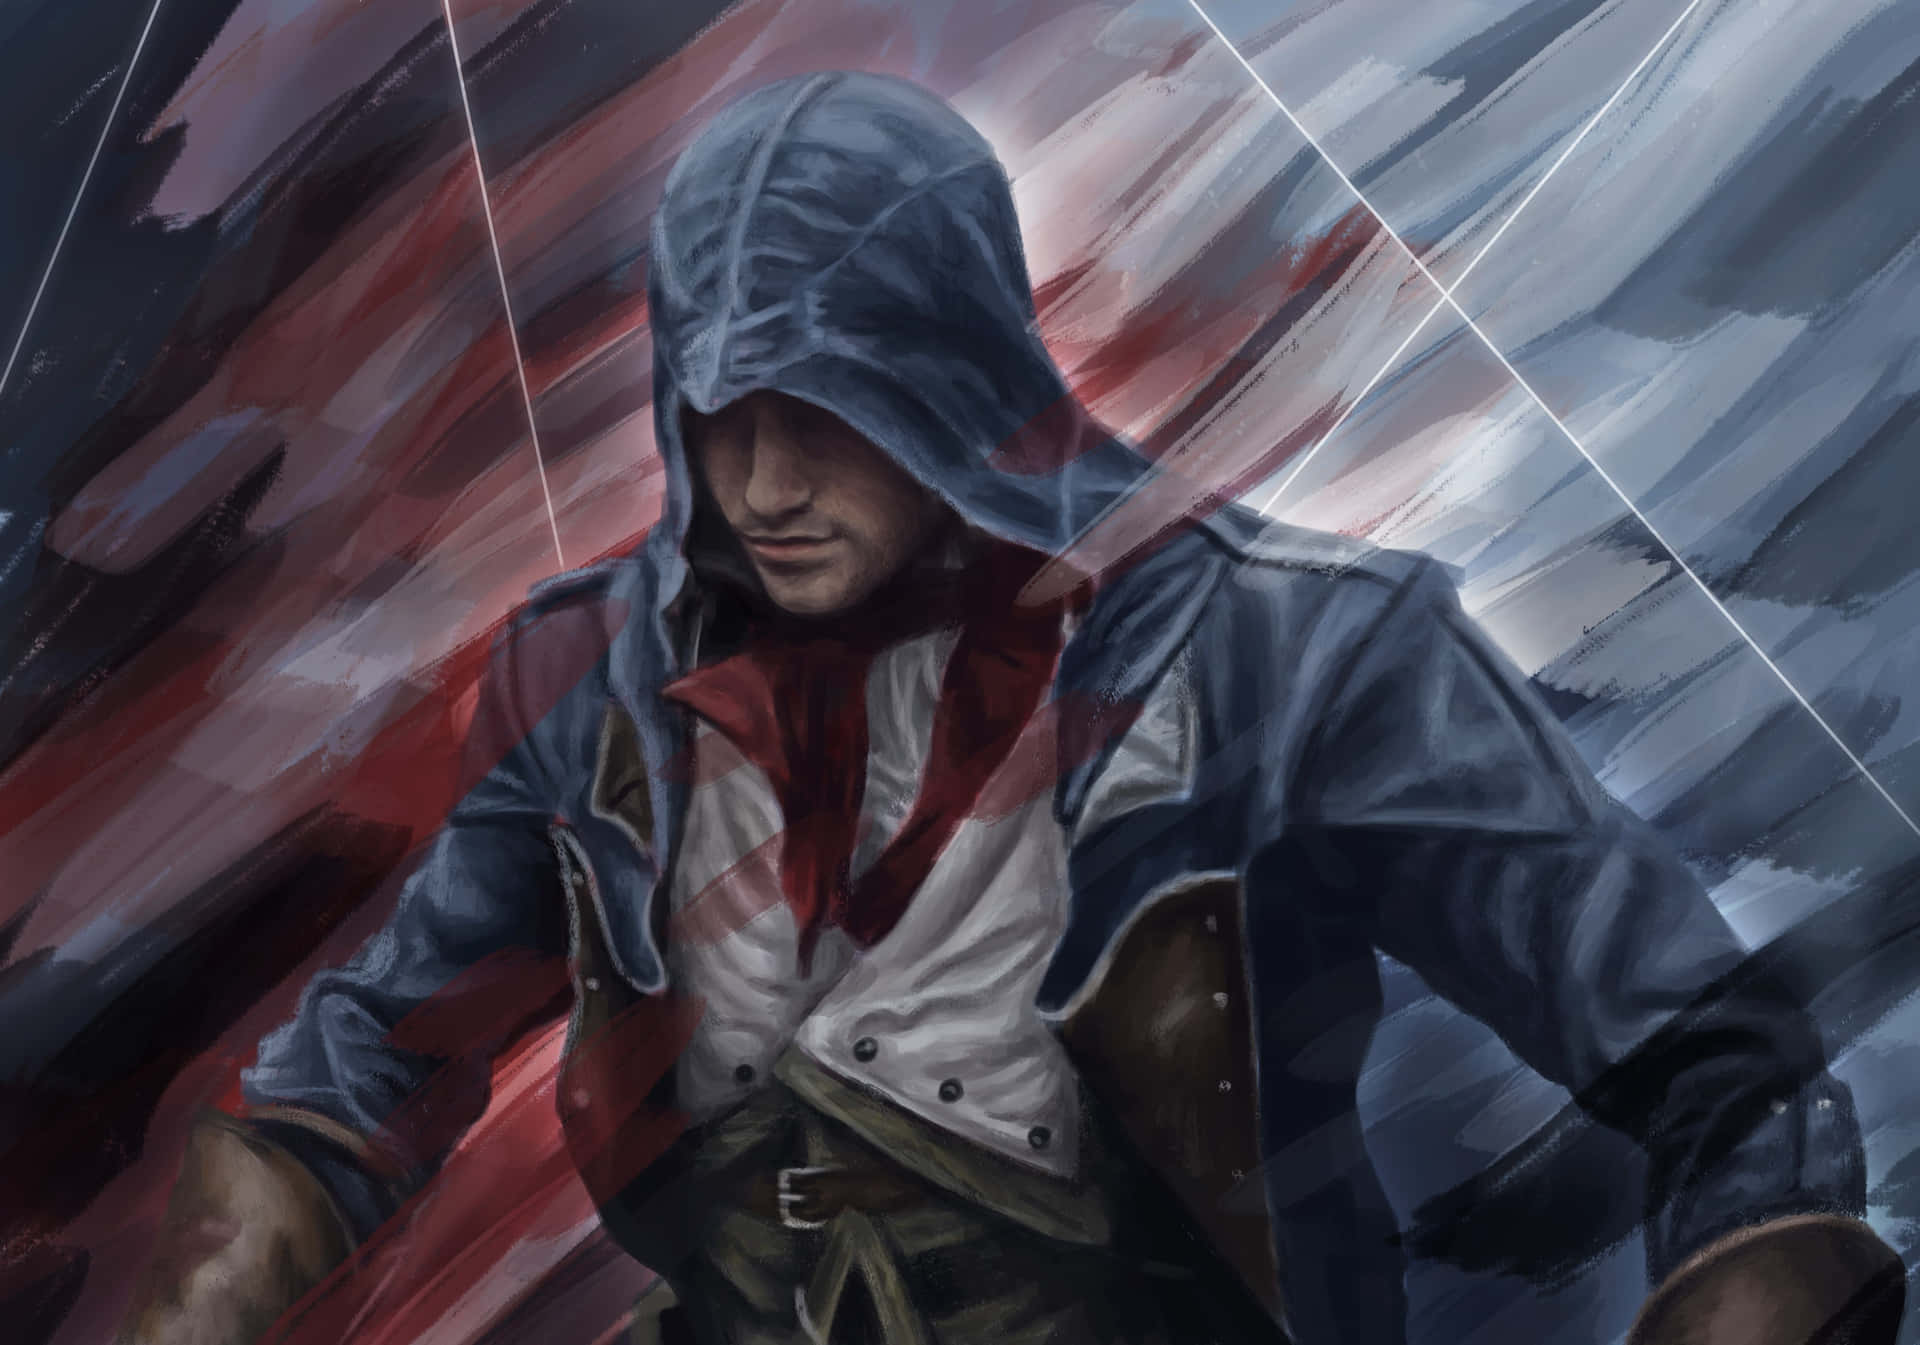 Arno Dorian leaps into action in Assassin's Creed Unity Wallpaper